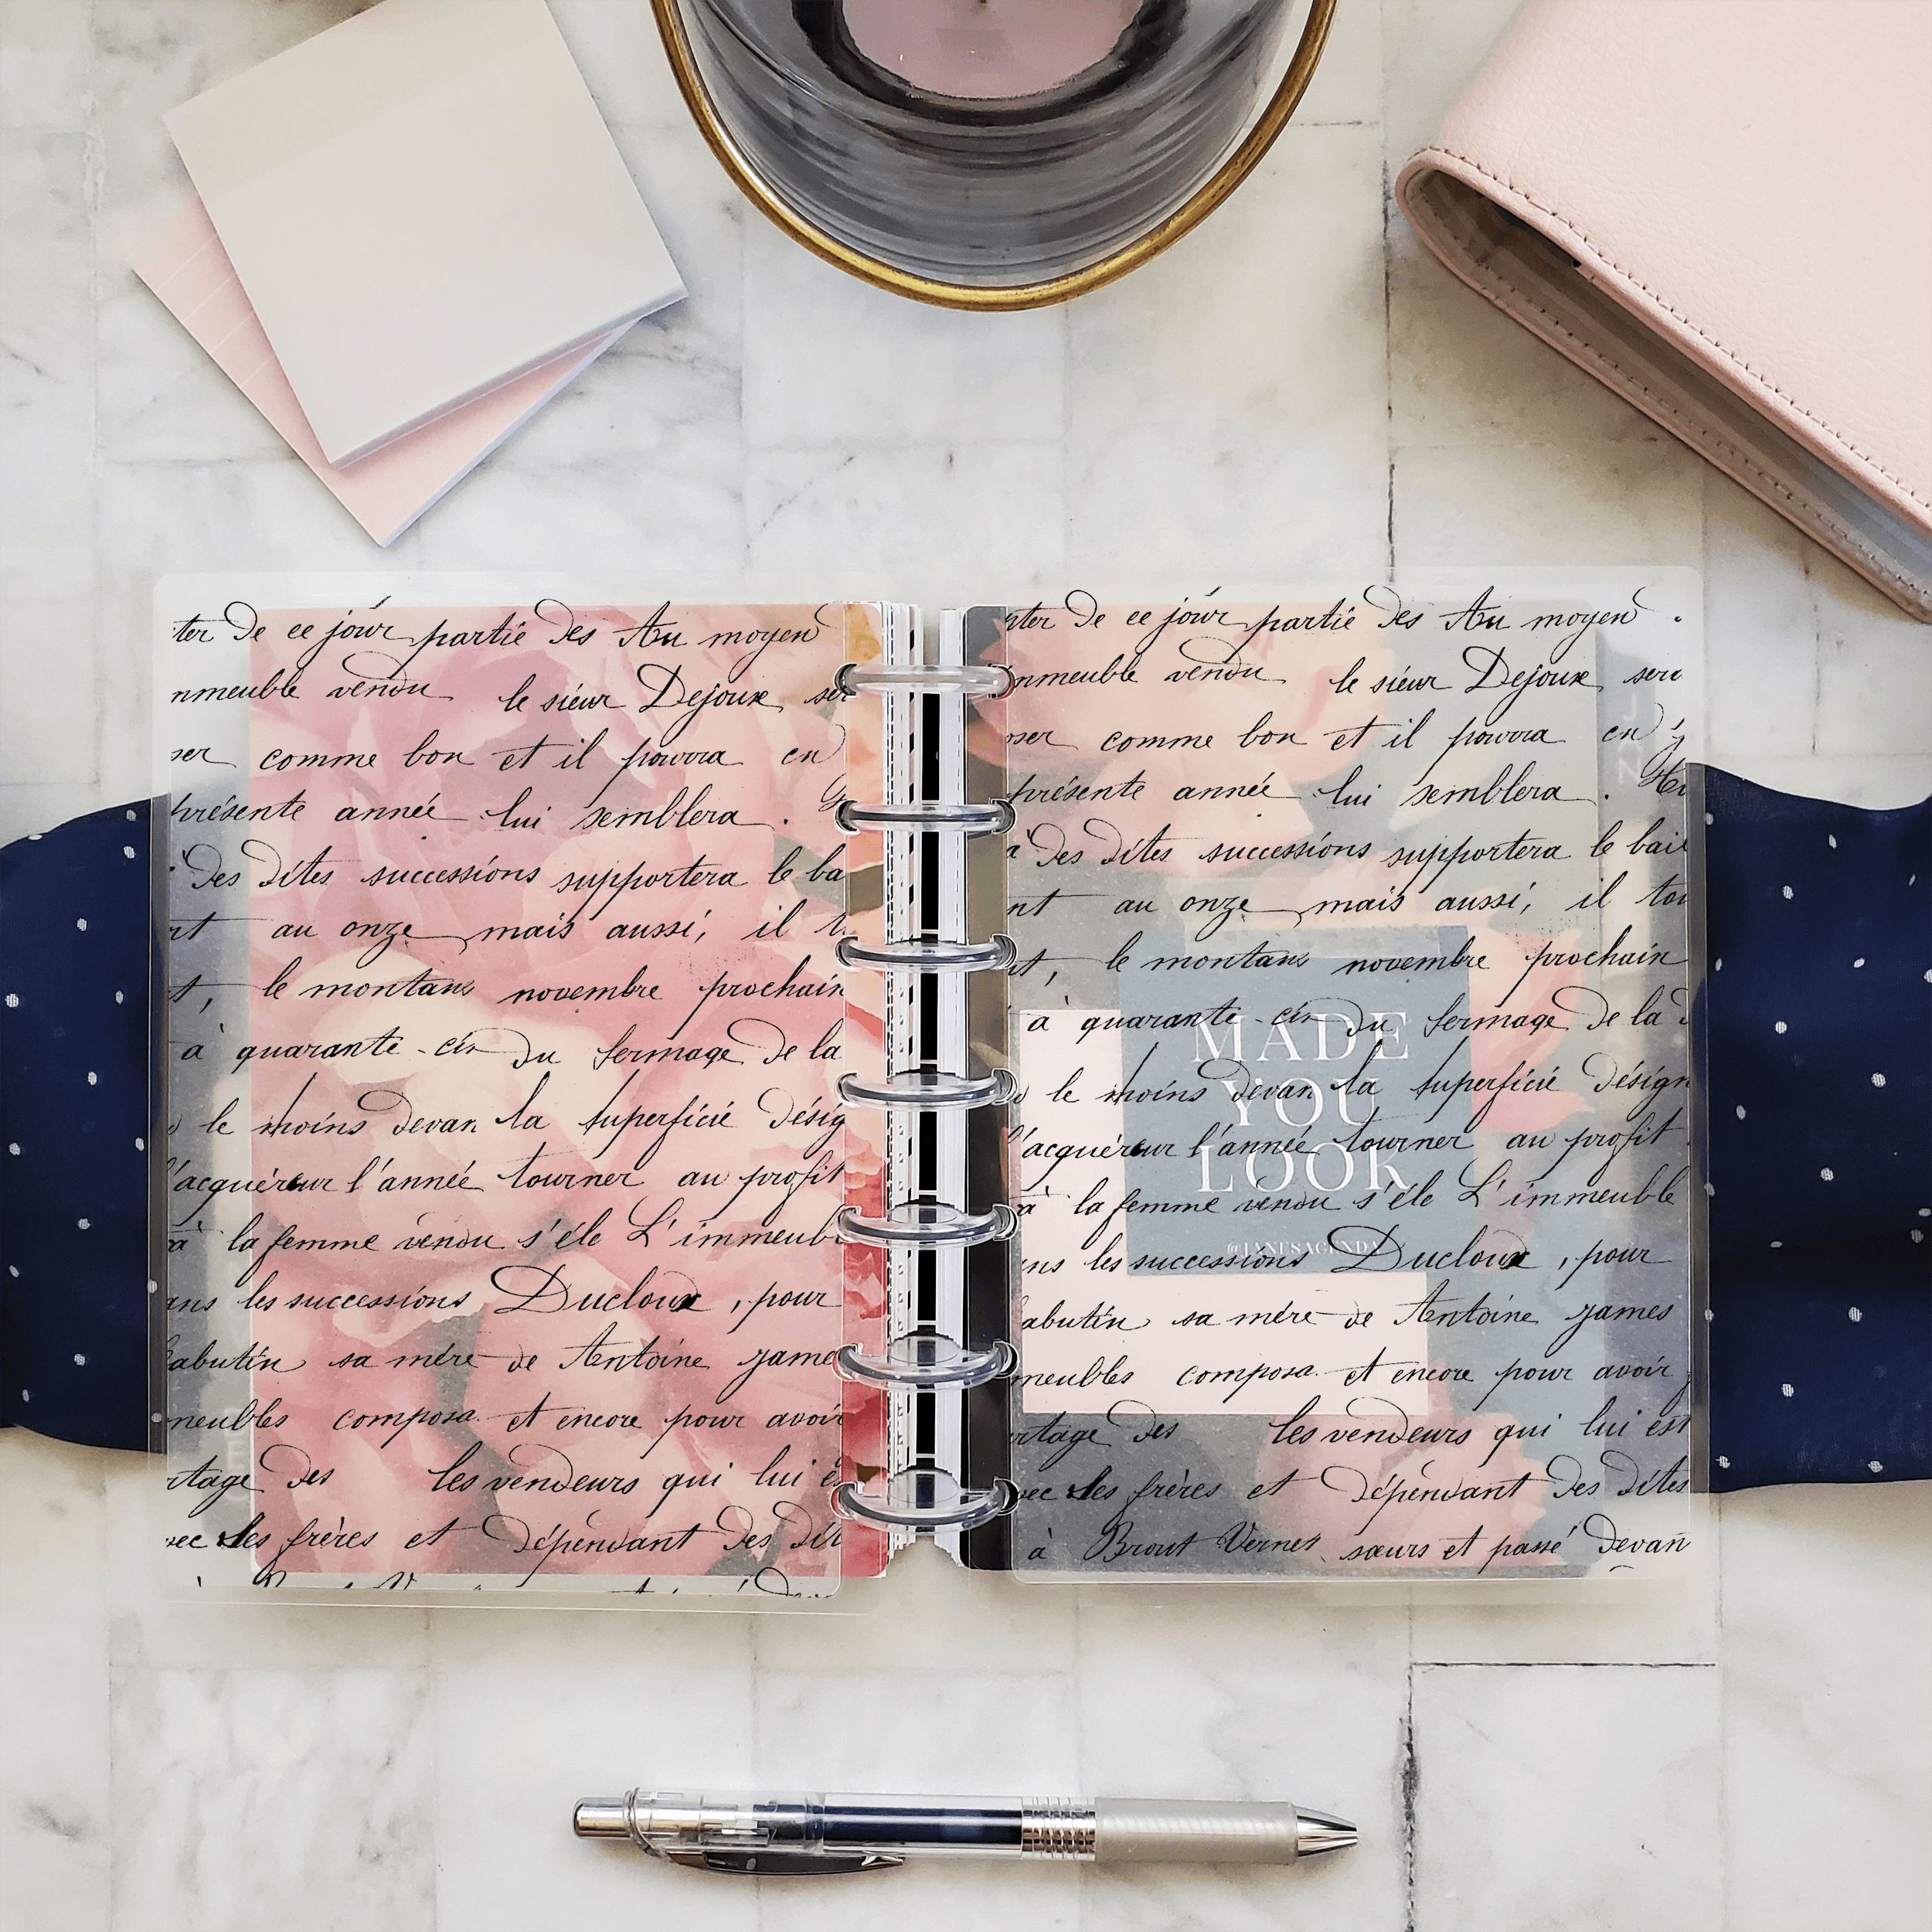 French Paris Handwriting Vellum Planner Cover by Jane's Agenda® for disc-bound planner systems